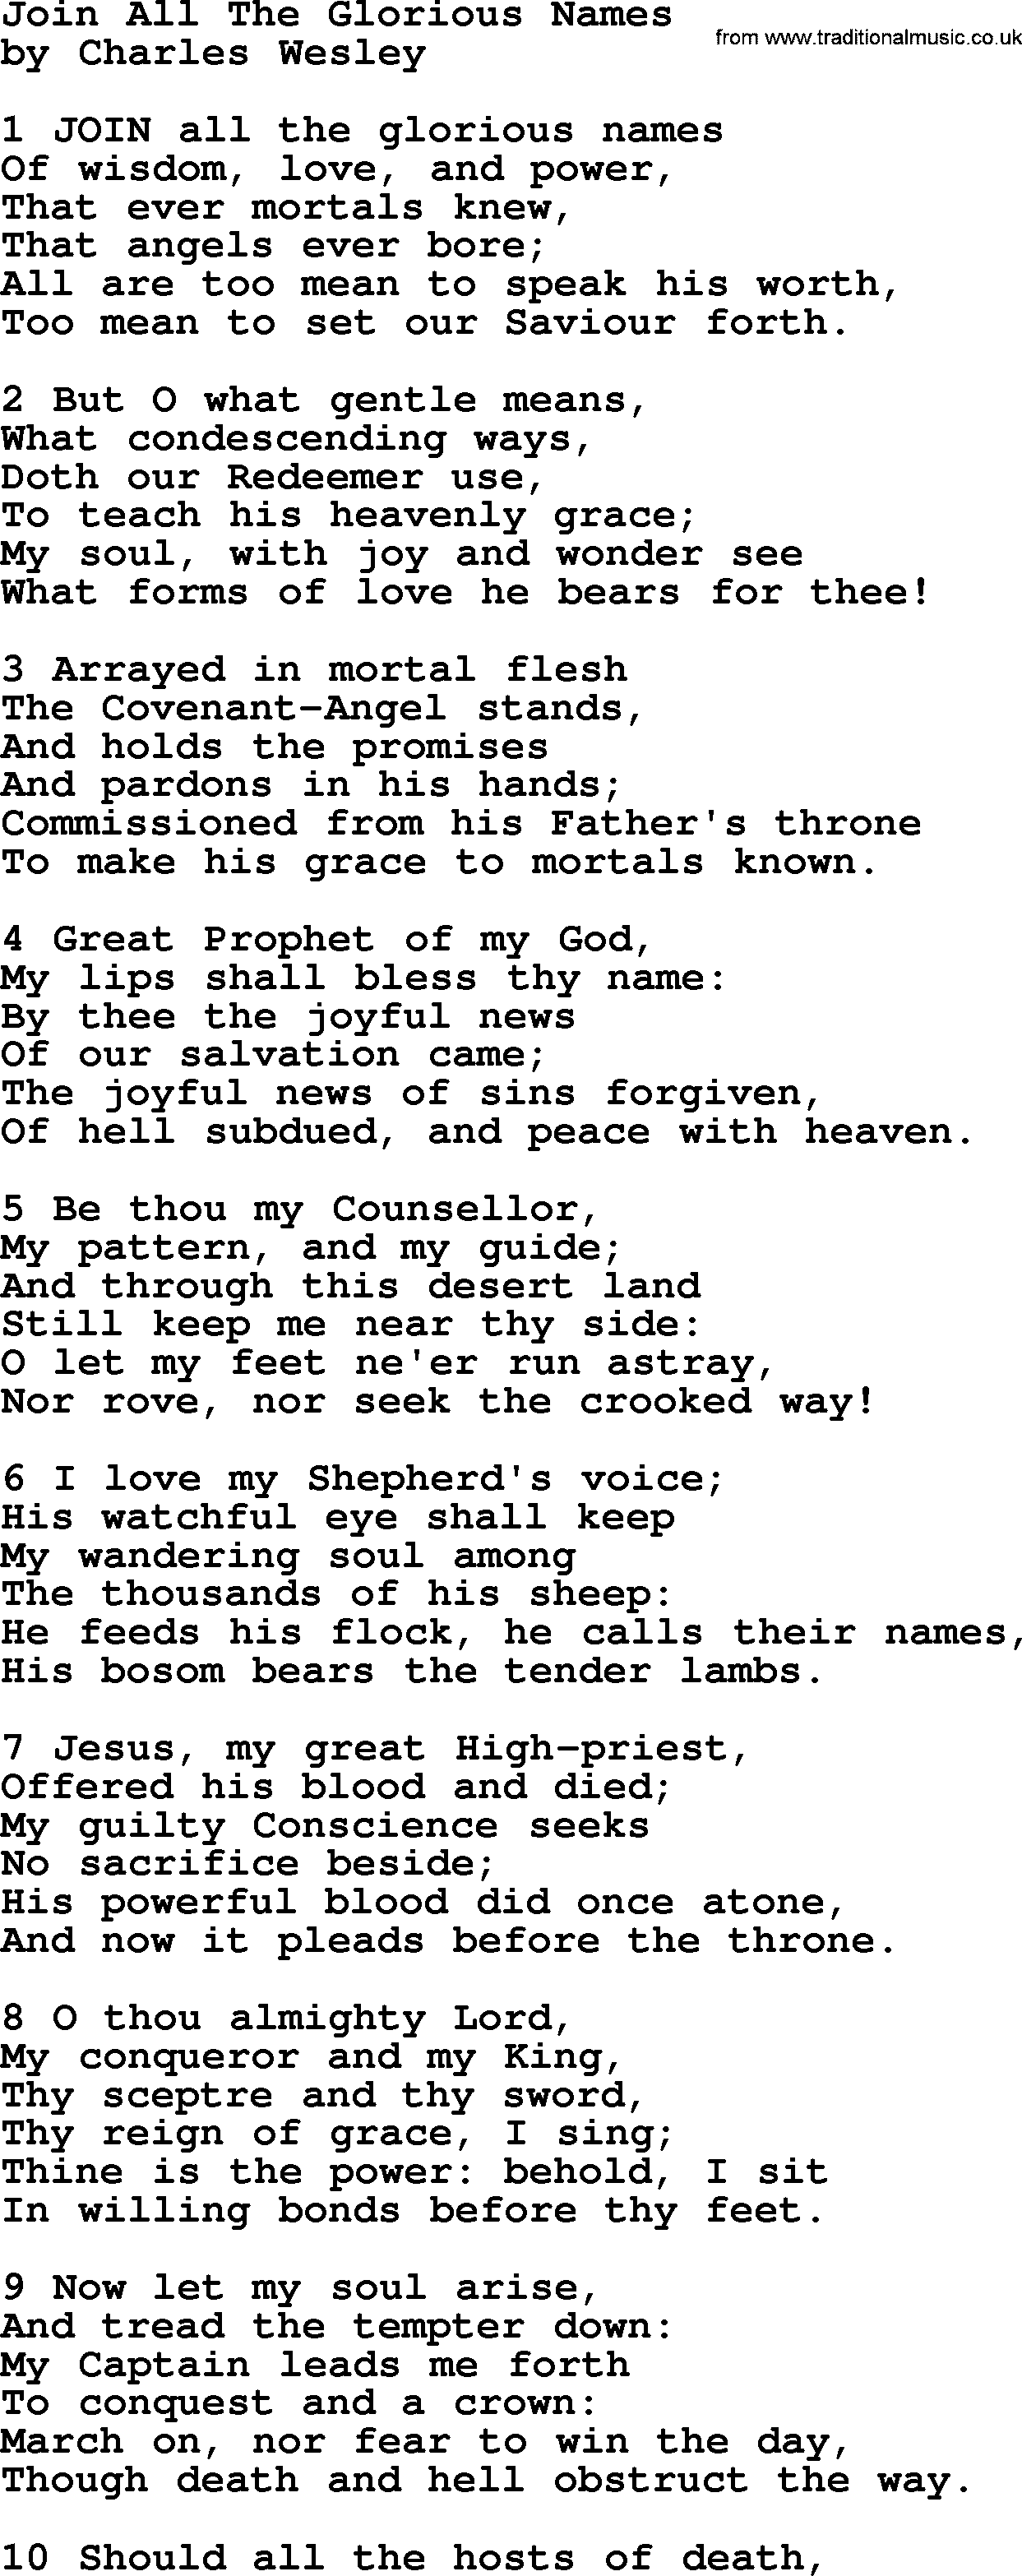 Charles Wesley hymn: Join All The Glorious Names, lyrics